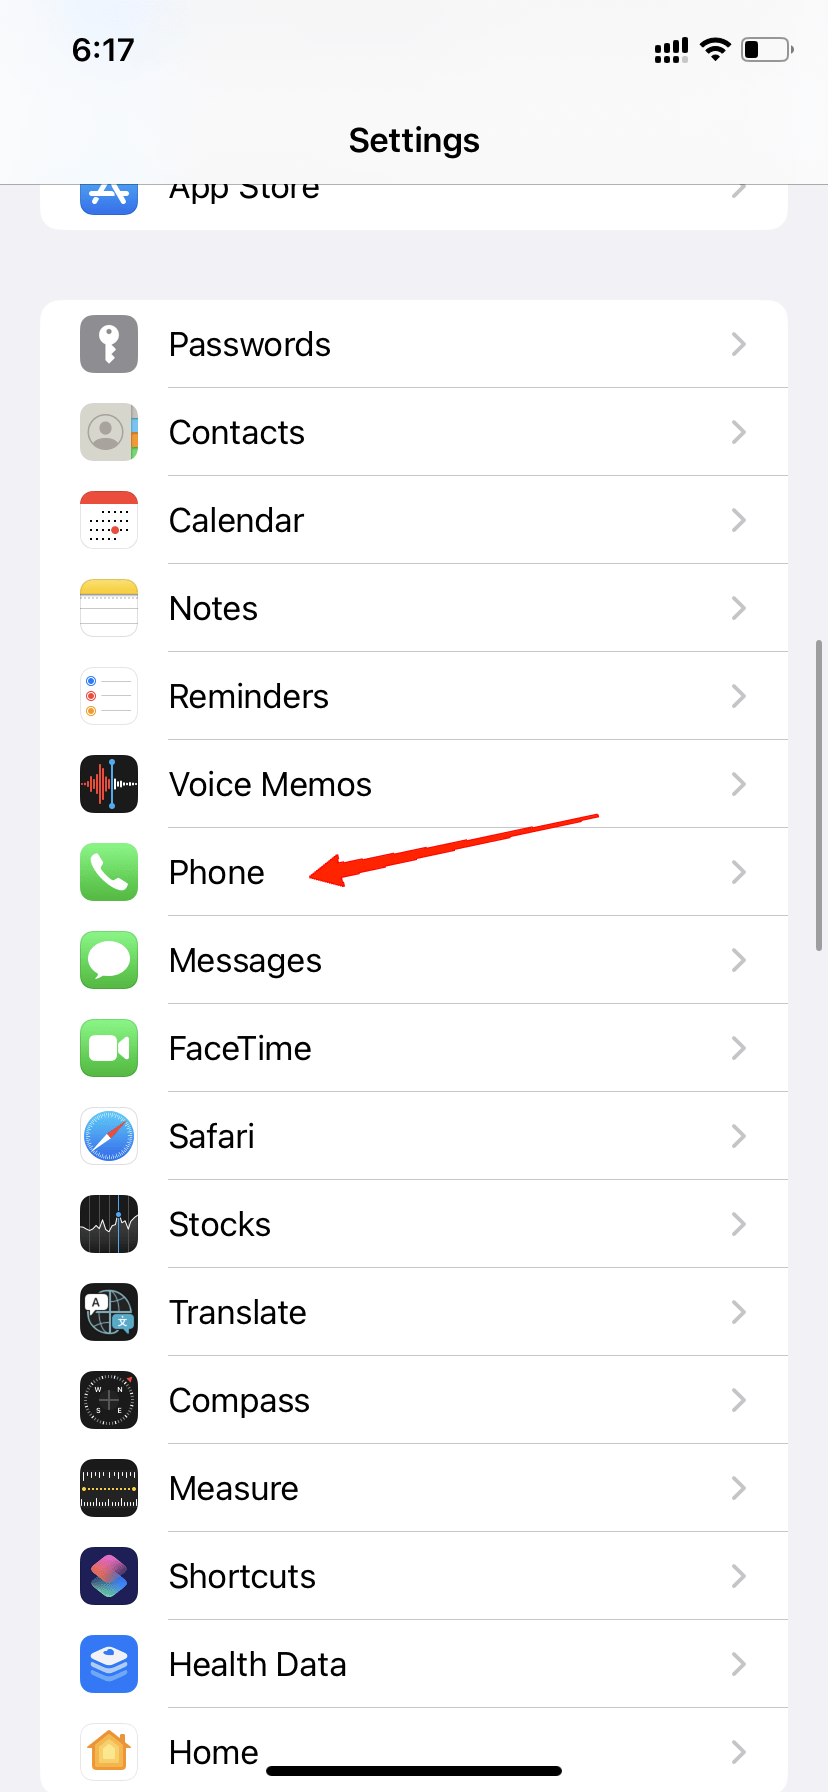 Now go back to the settings app and navigate to the phone section.